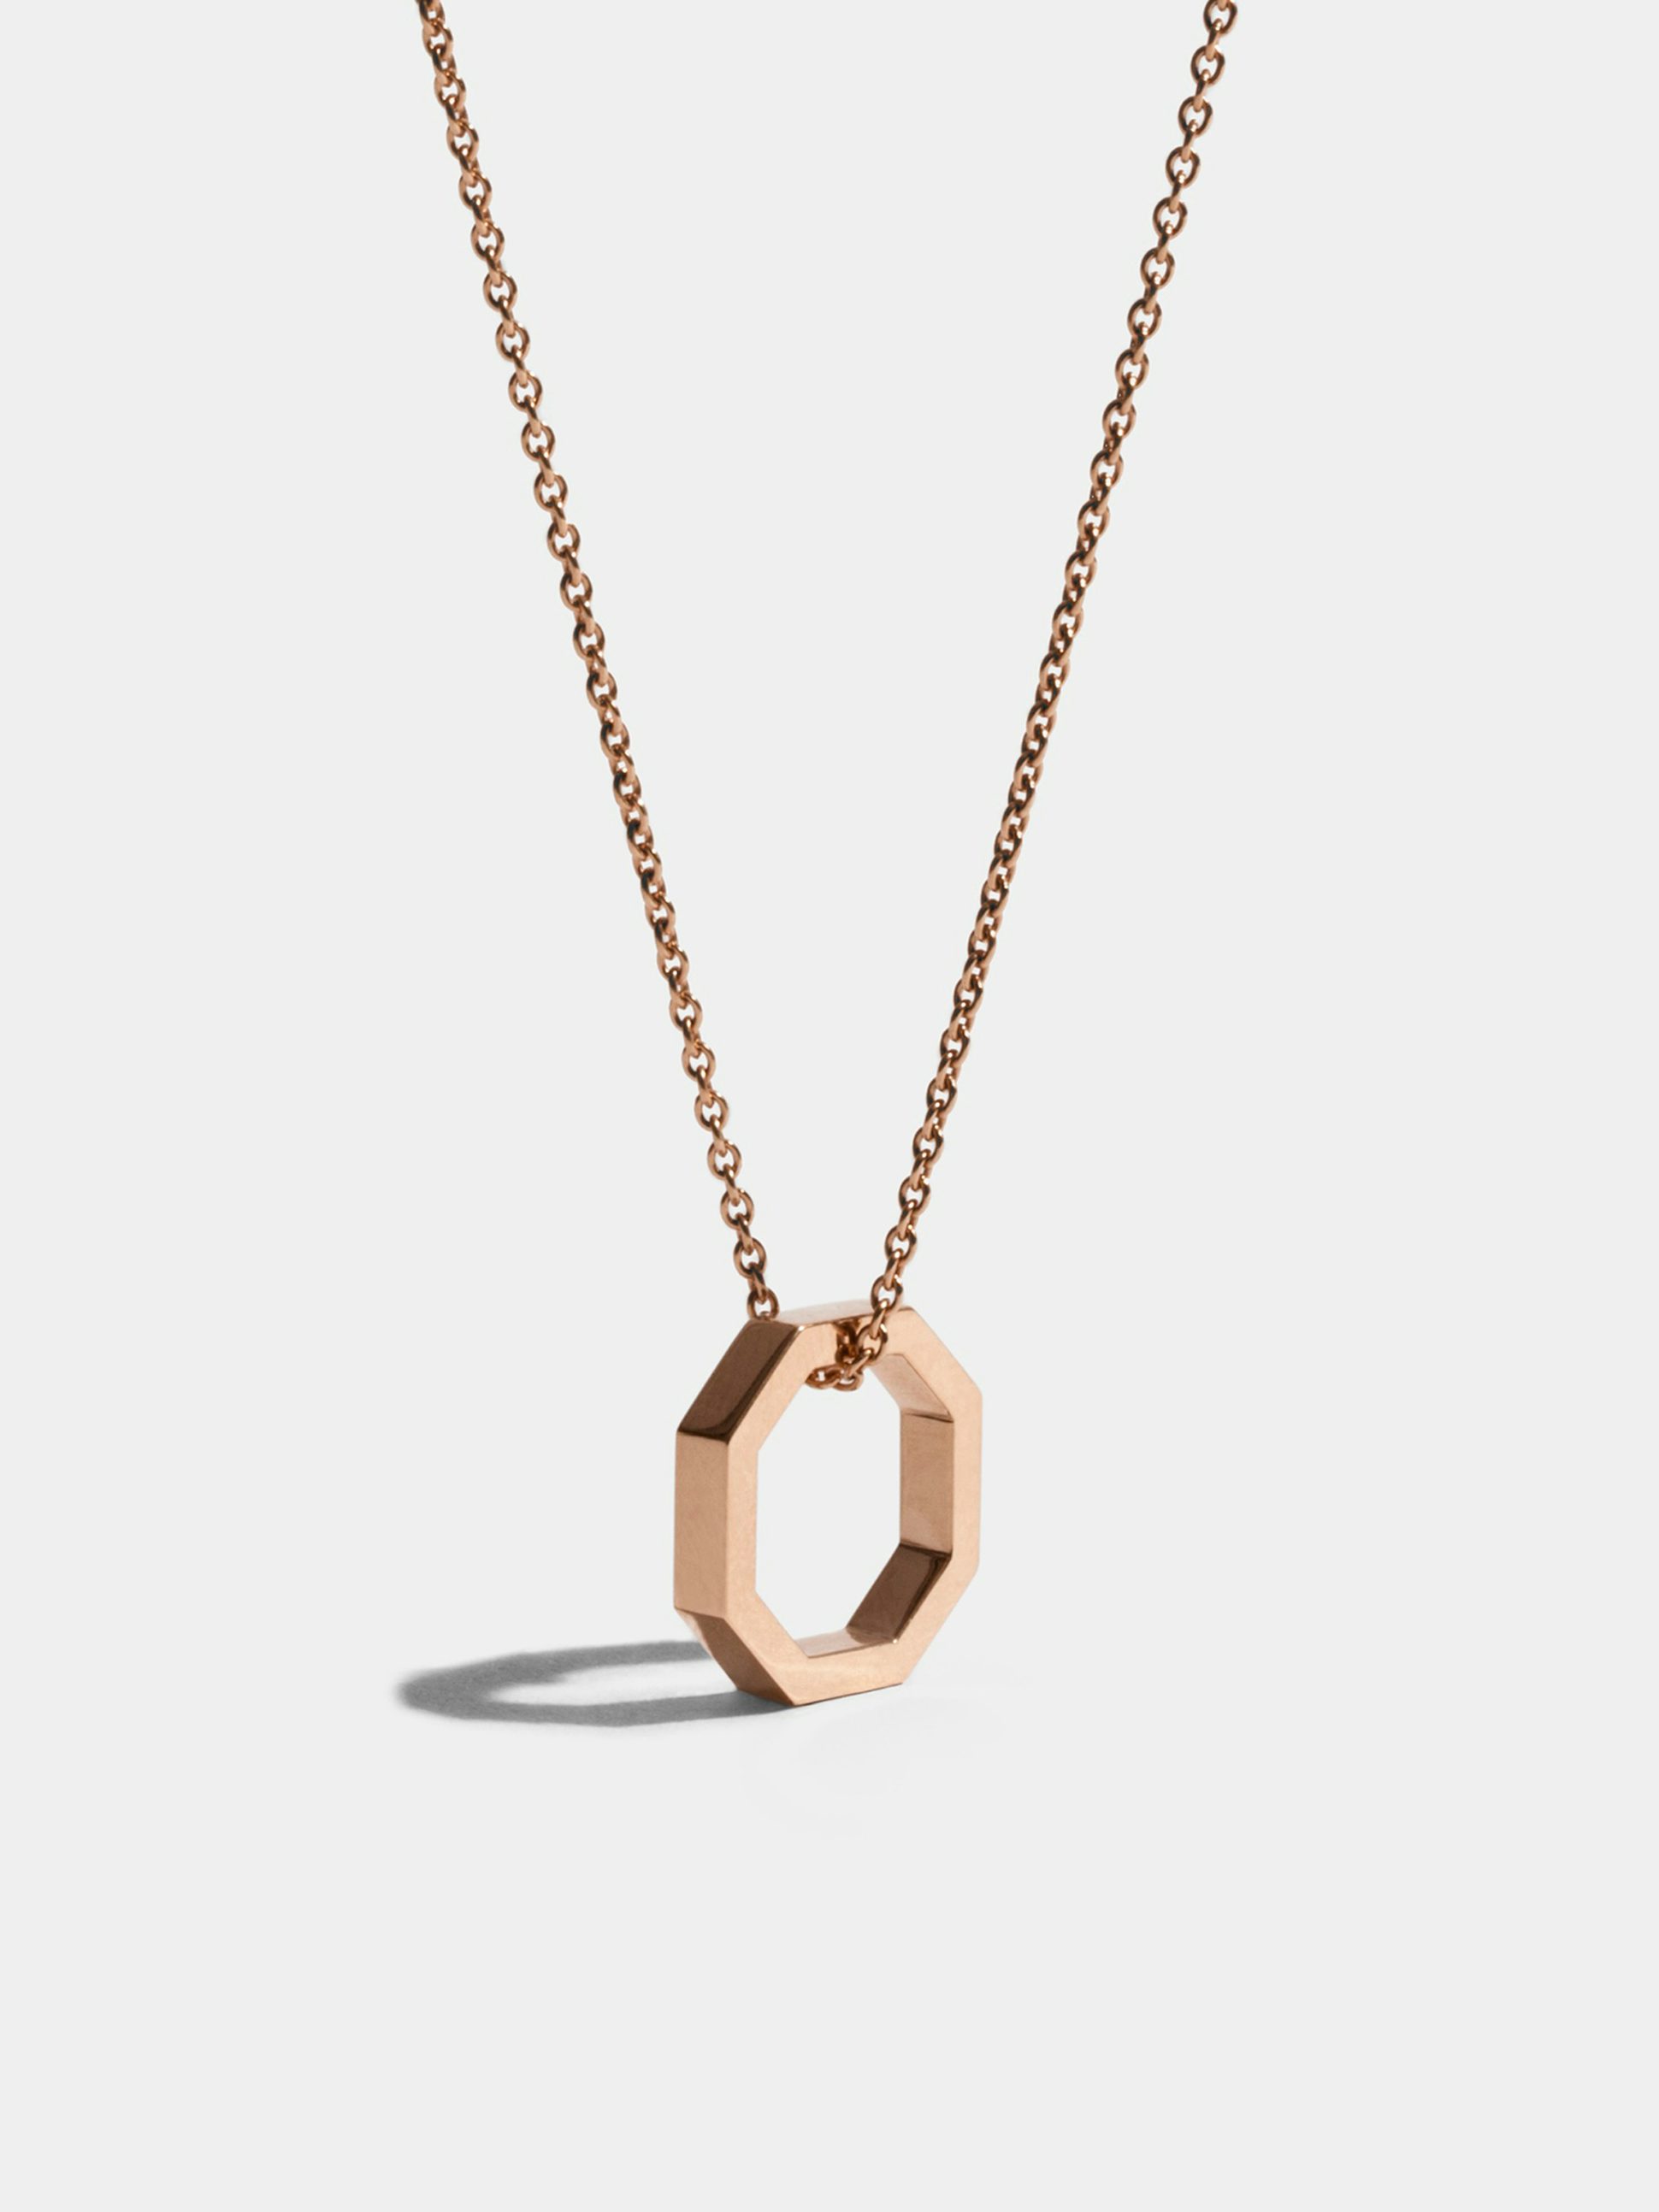 Octogone 14mm pendant in 18k Fairmined ethical rose gold, on a chain.